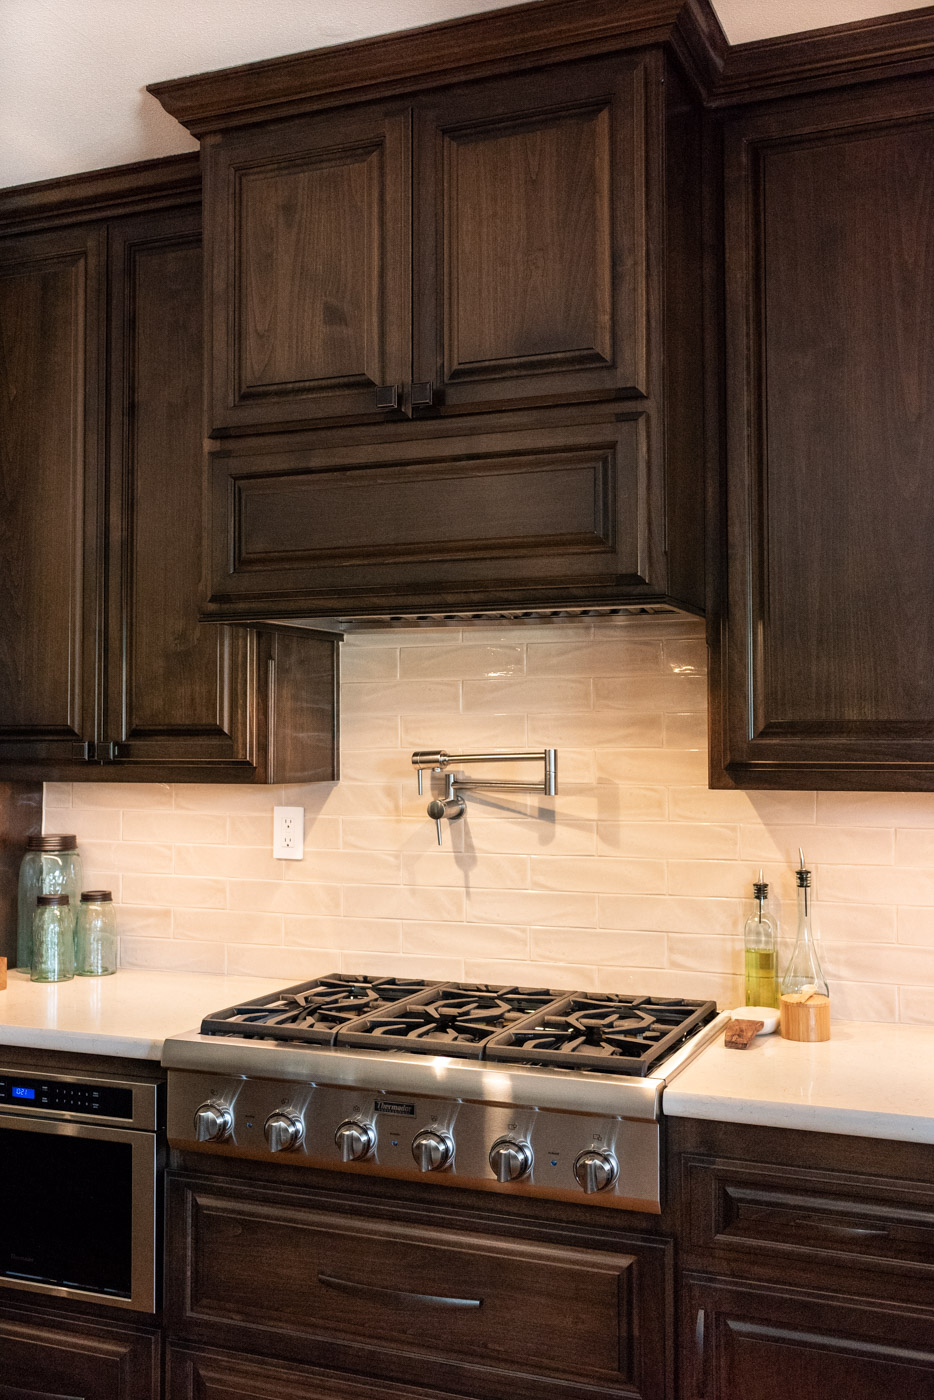 Custom Kitchen Cabinets In Paso Robles, How Do You Stain Cabinets Darker